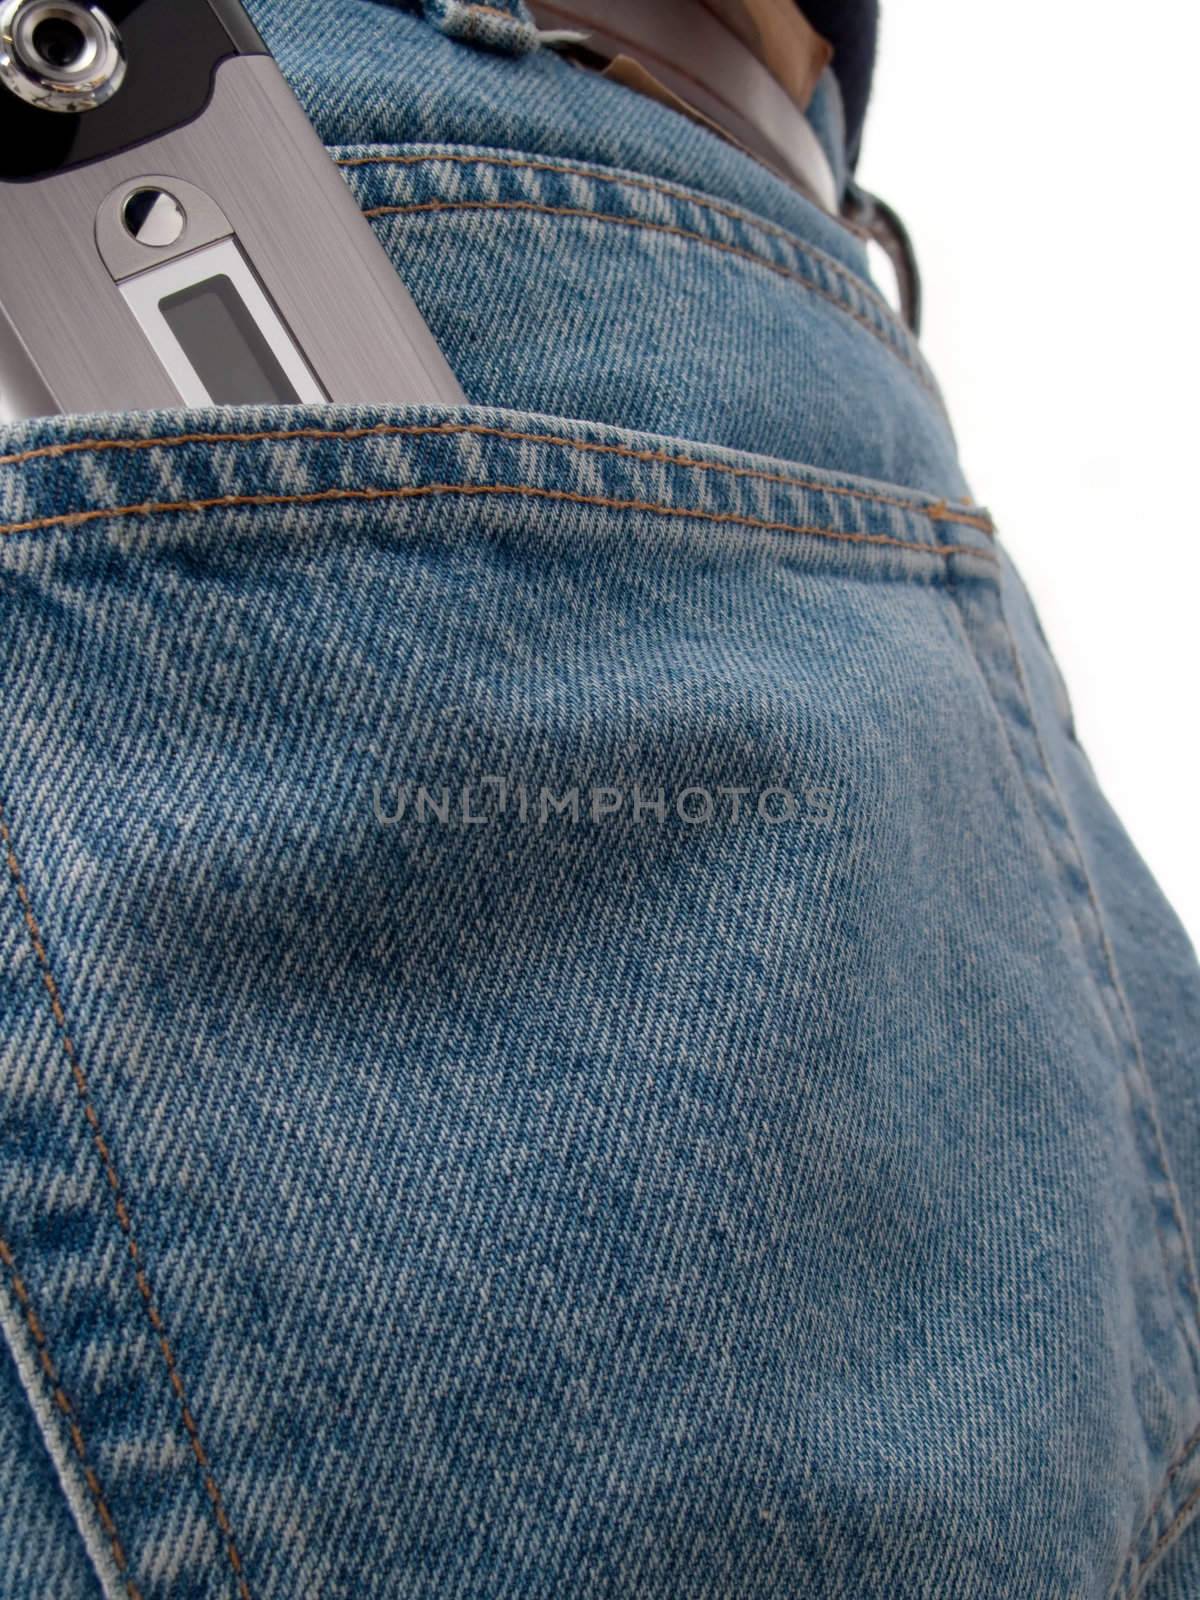 Closeup of cel phone in back pocket by woodygraphs